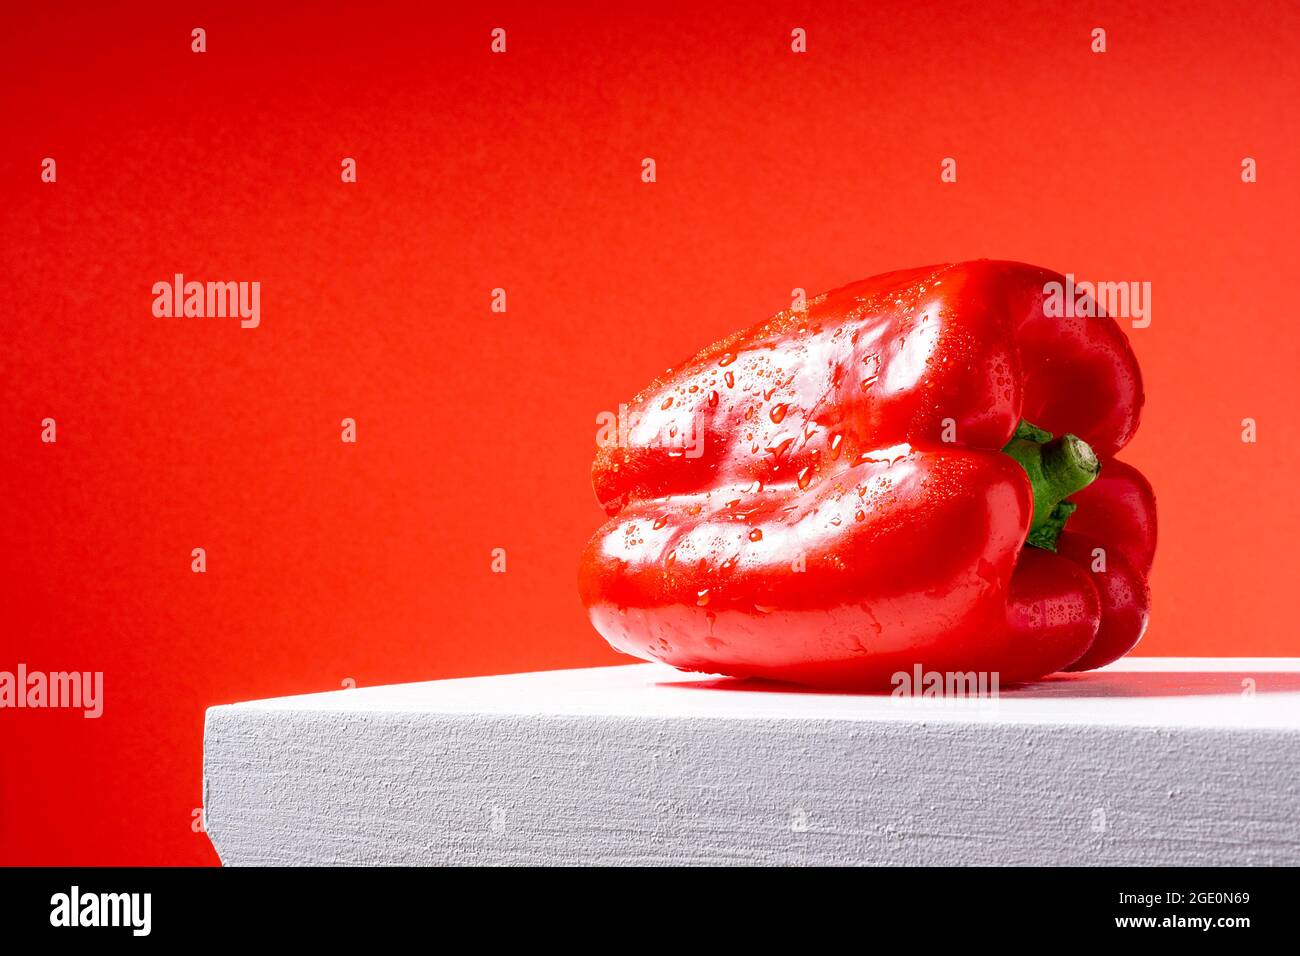 Photo of a wet red pepper on a white table and red background.The photograph is taken in horizontal format and has space to put text. Stock Photo